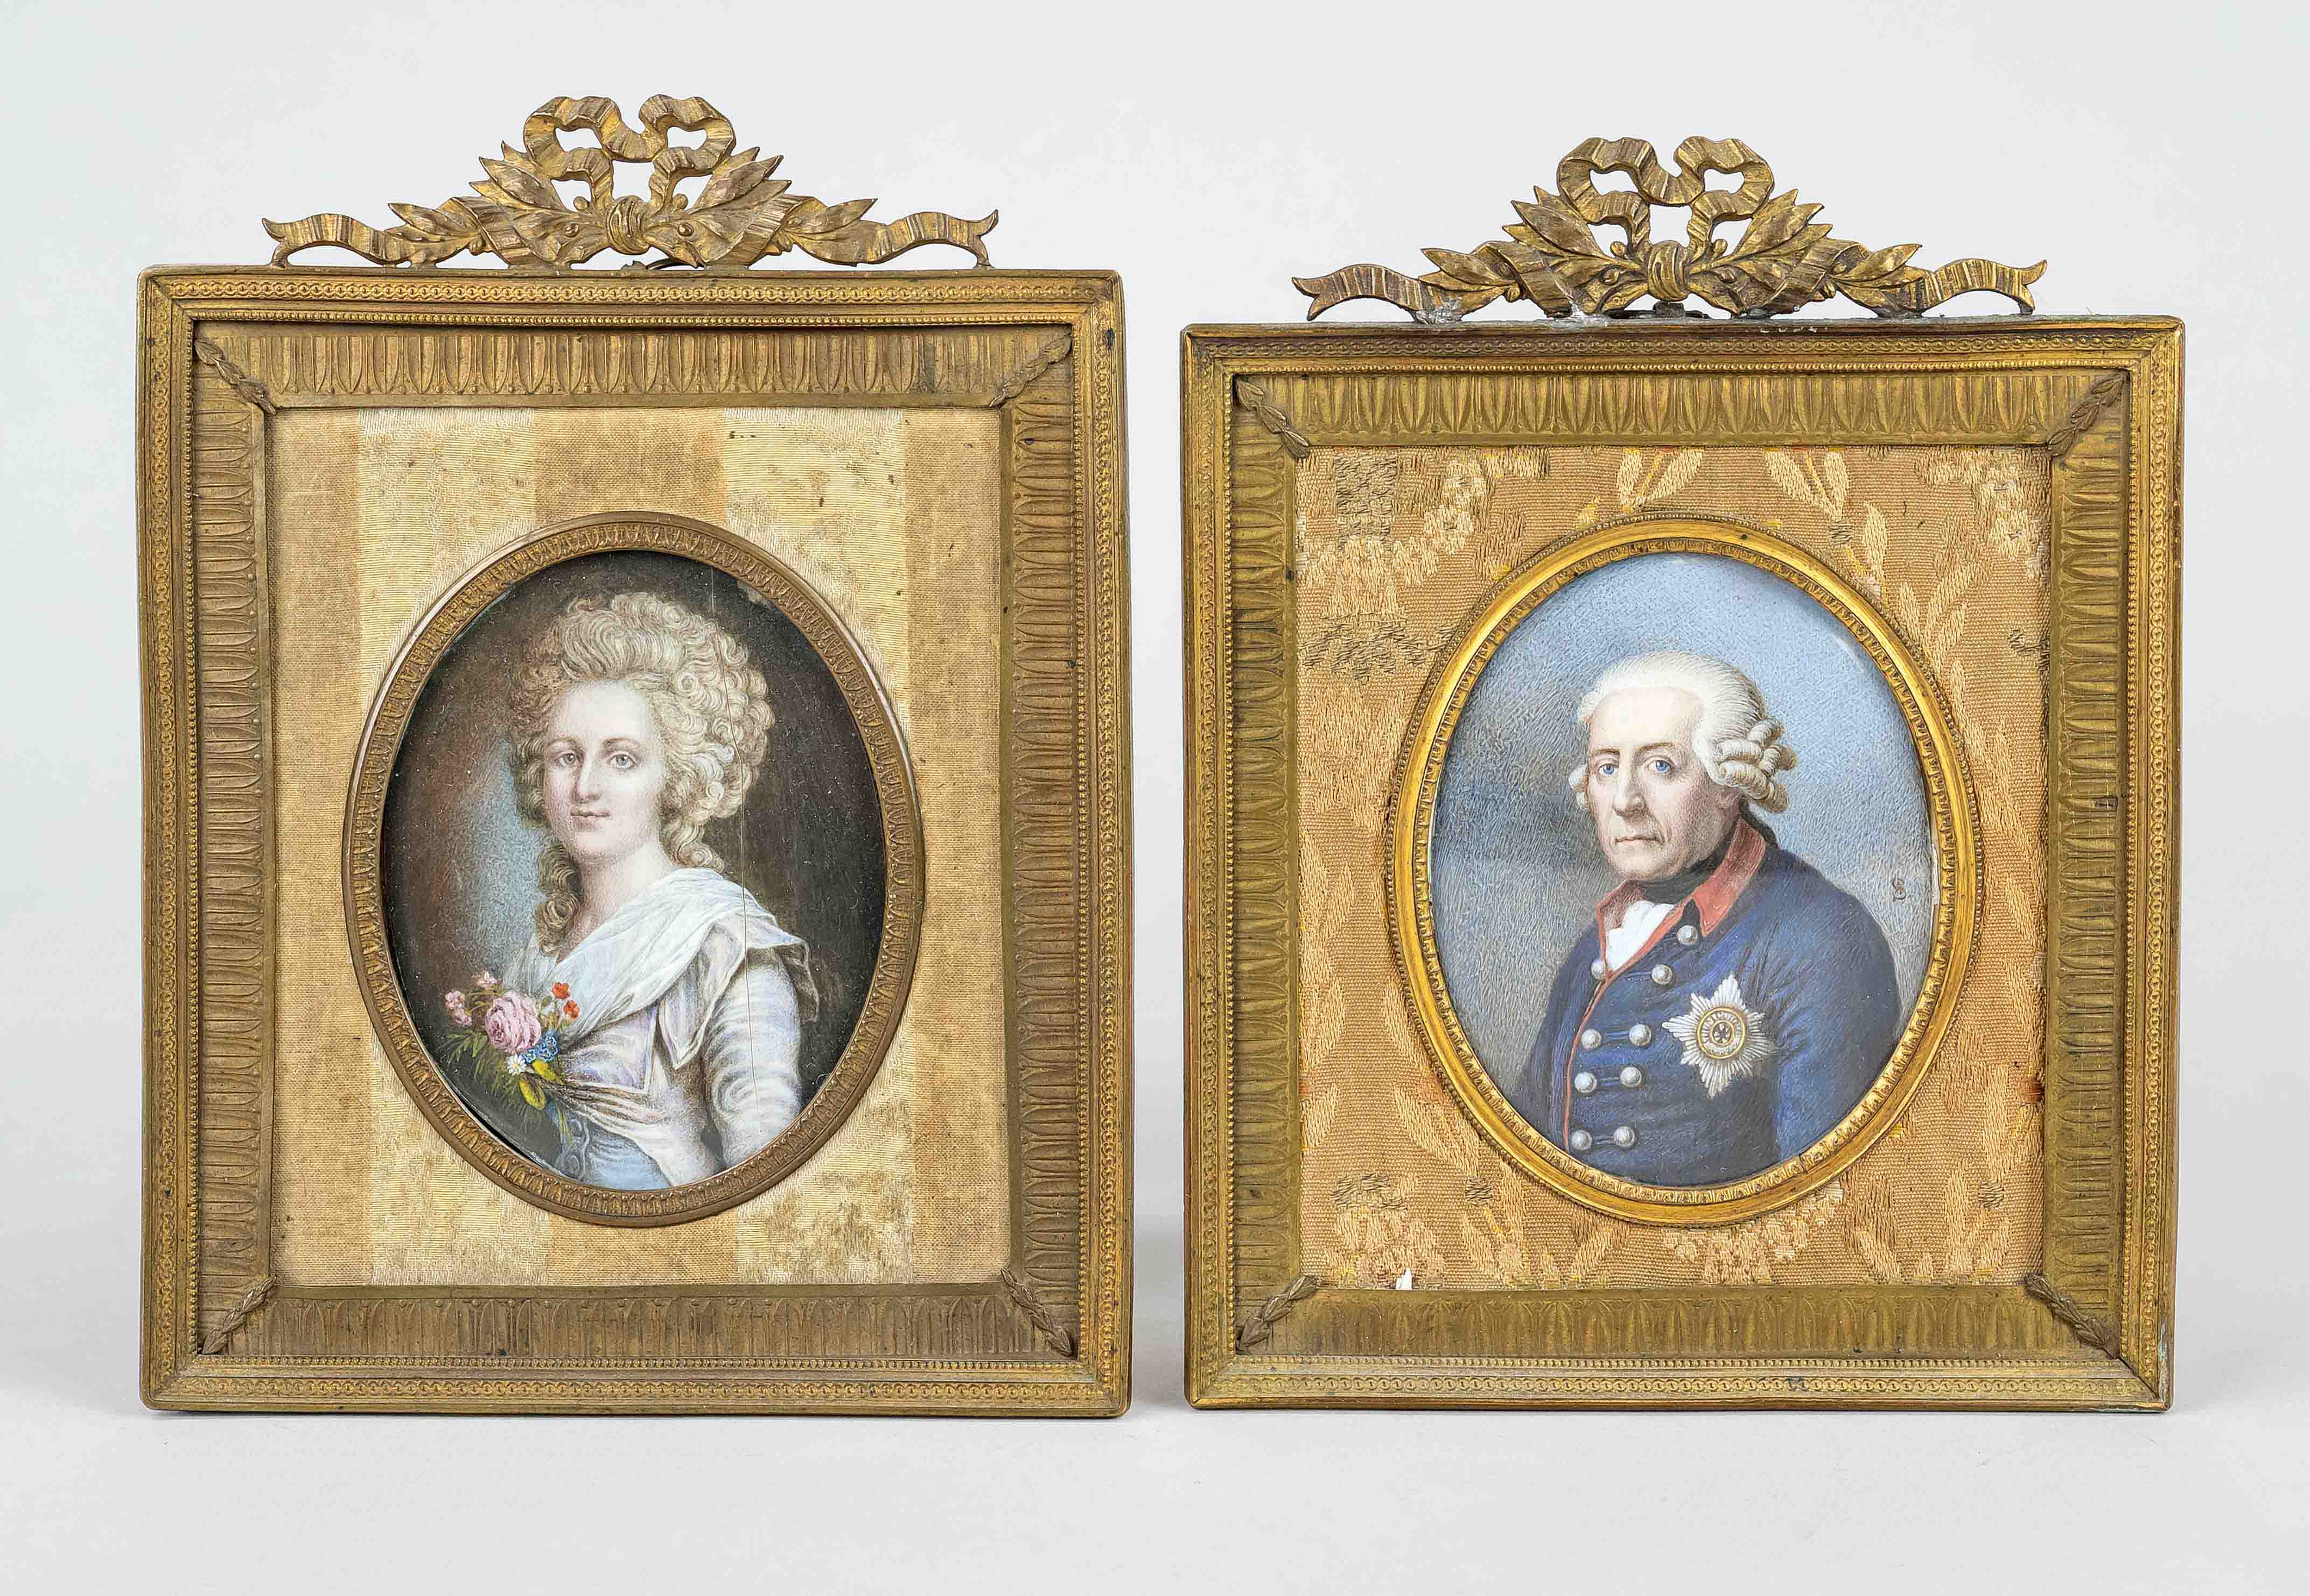 The Old Fritz and his wife (King Frederick II and Queen Elisabeth Christine of Prussia). Miniature